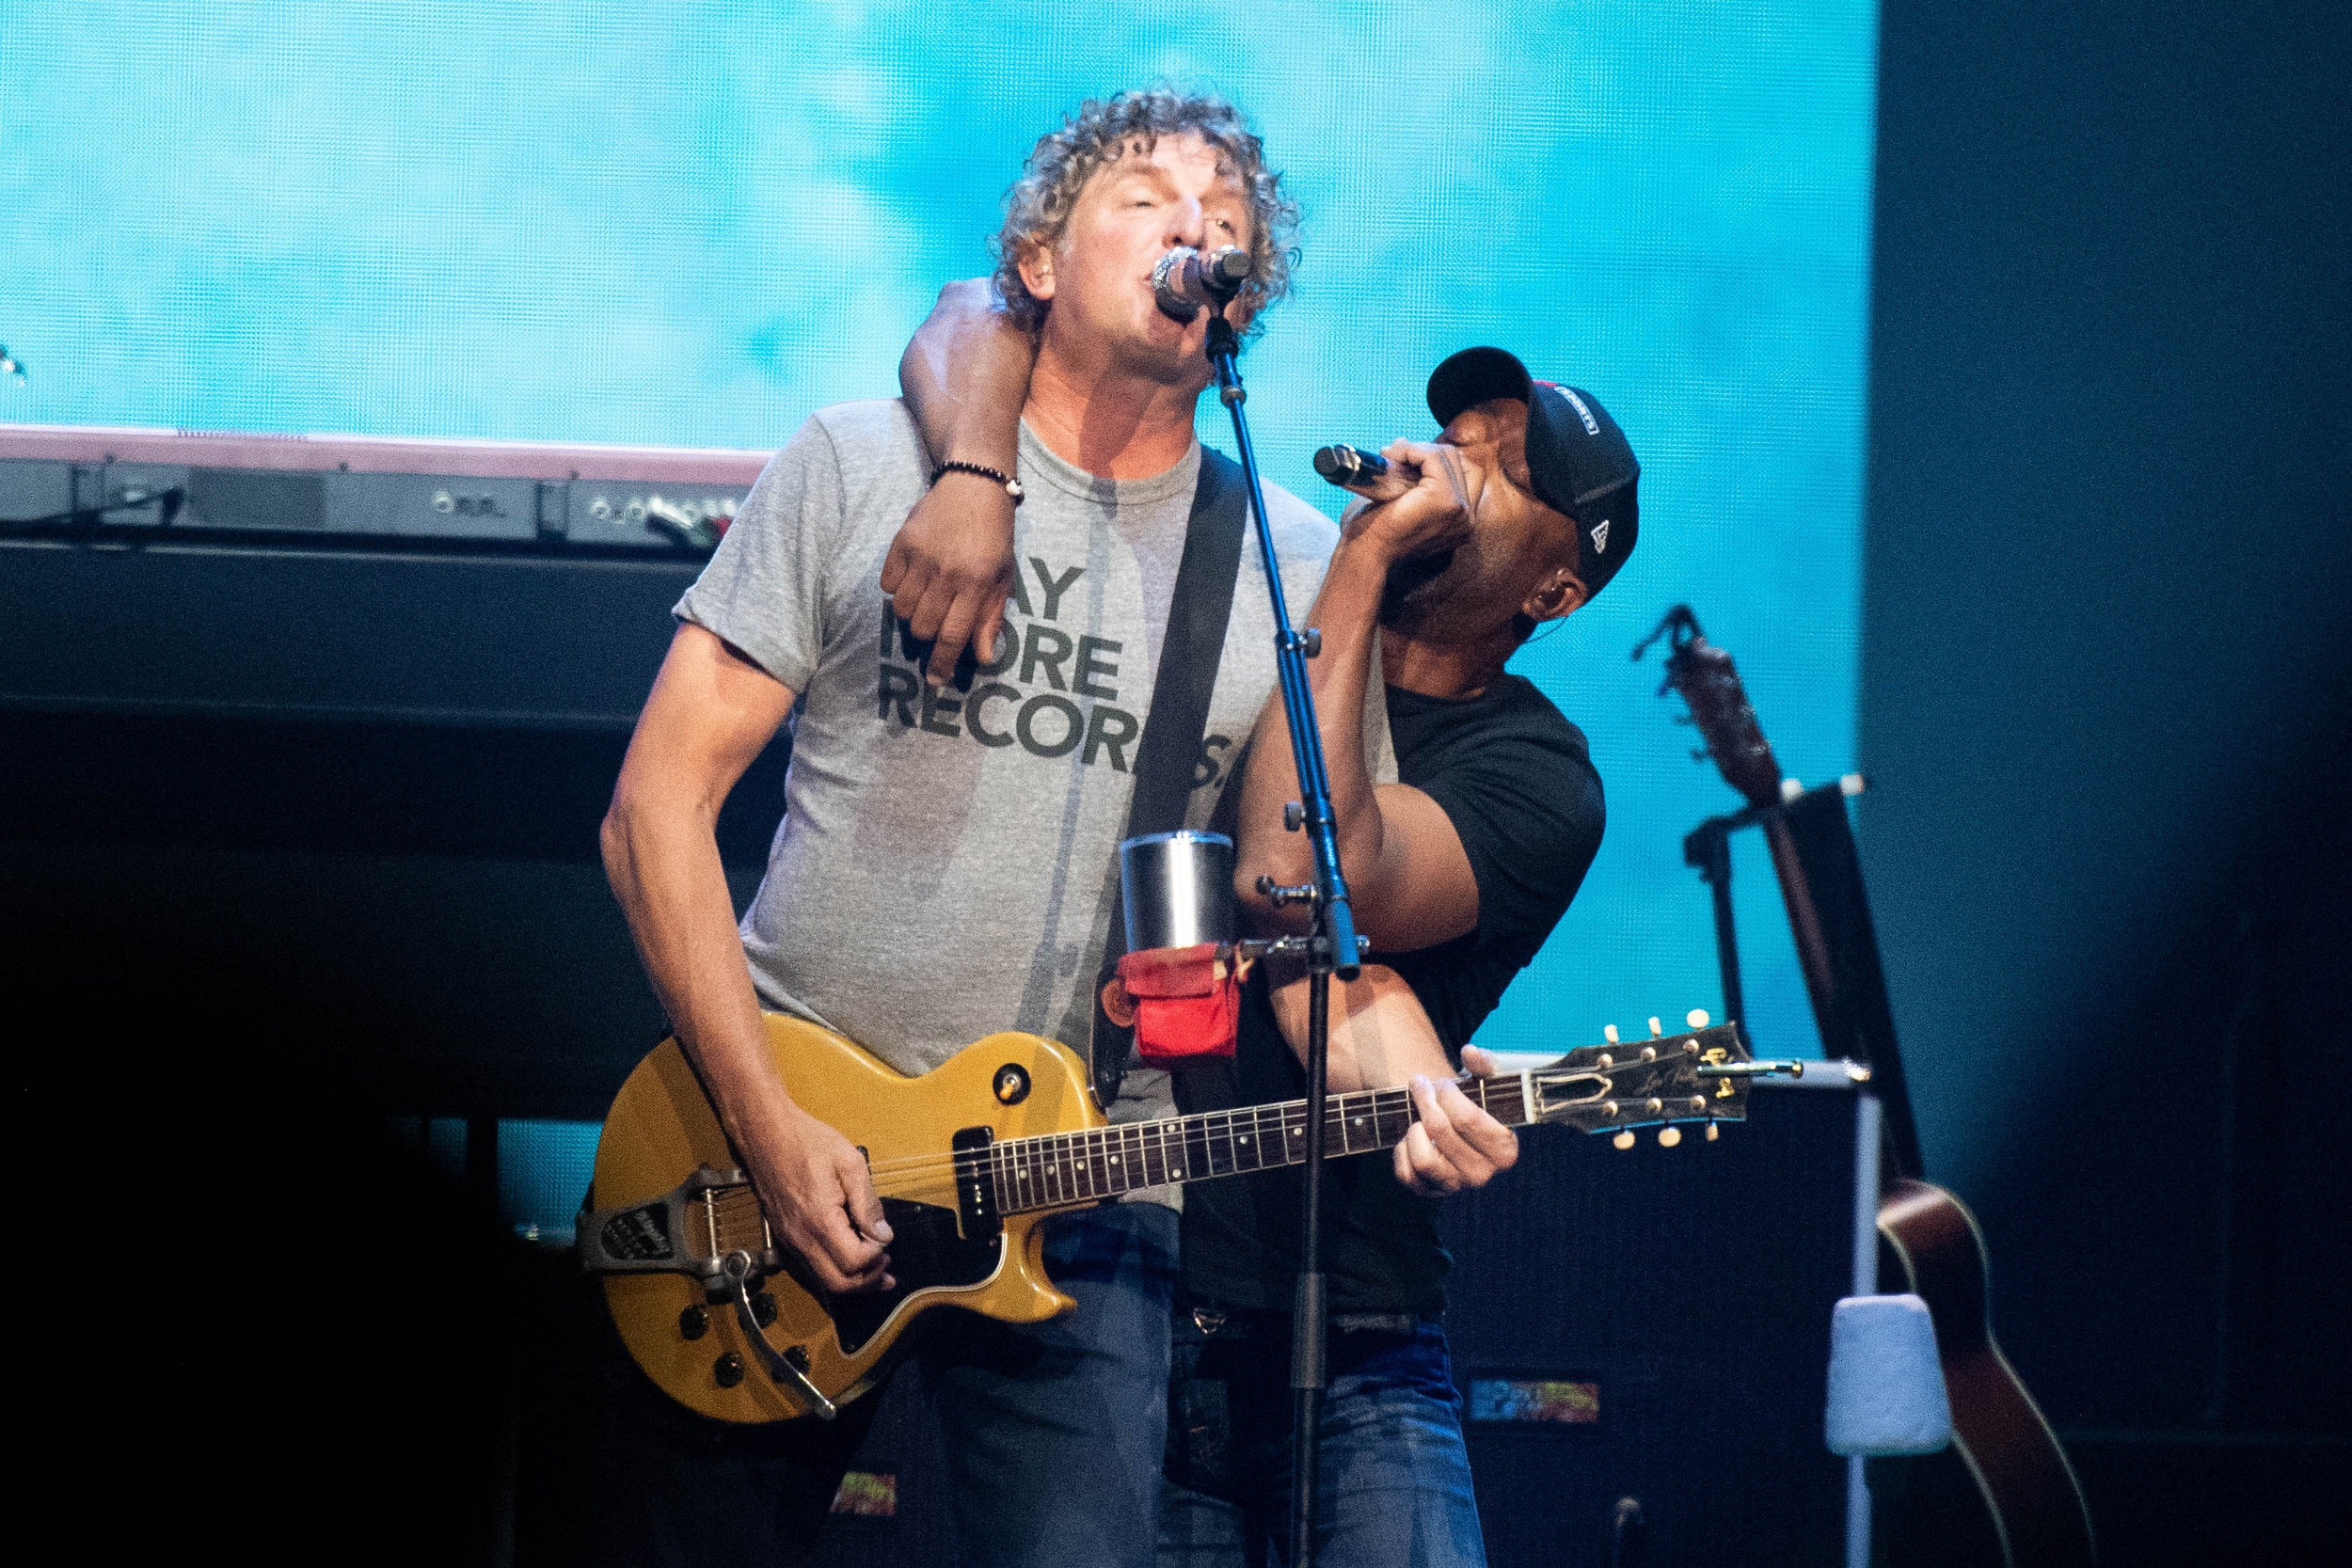 <p>Middle-aged, former fraternity and sorority members have reason to rejoice. Grammy Award-winning Hootie and the Blowfish will embark on their first full-blown tour since 2019, and ready to crank out singalong, college-bar favorites like "<a href="https://www.youtube.com/watch?v=xoW3bqnr7tw">Hold My Hand</a>" and "Only Wanna Be with You," Darius Rucker and Co, are set to play 43 cities across America and Canada, beginning in Dallas on May 30. Tour stops include famous venues such as Boston's Fenway Park and two shows in Columbia, S.C., where the band was formed while its members attended the University of South Carolina.</p><p><a href='https://www.msn.com/en-us/community/channel/vid-cj9pqbr0vn9in2b6ddcd8sfgpfq6x6utp44fssrv6mc2gtybw0us'>Follow us on MSN to see more of our exclusive entertainment content.</a></p>